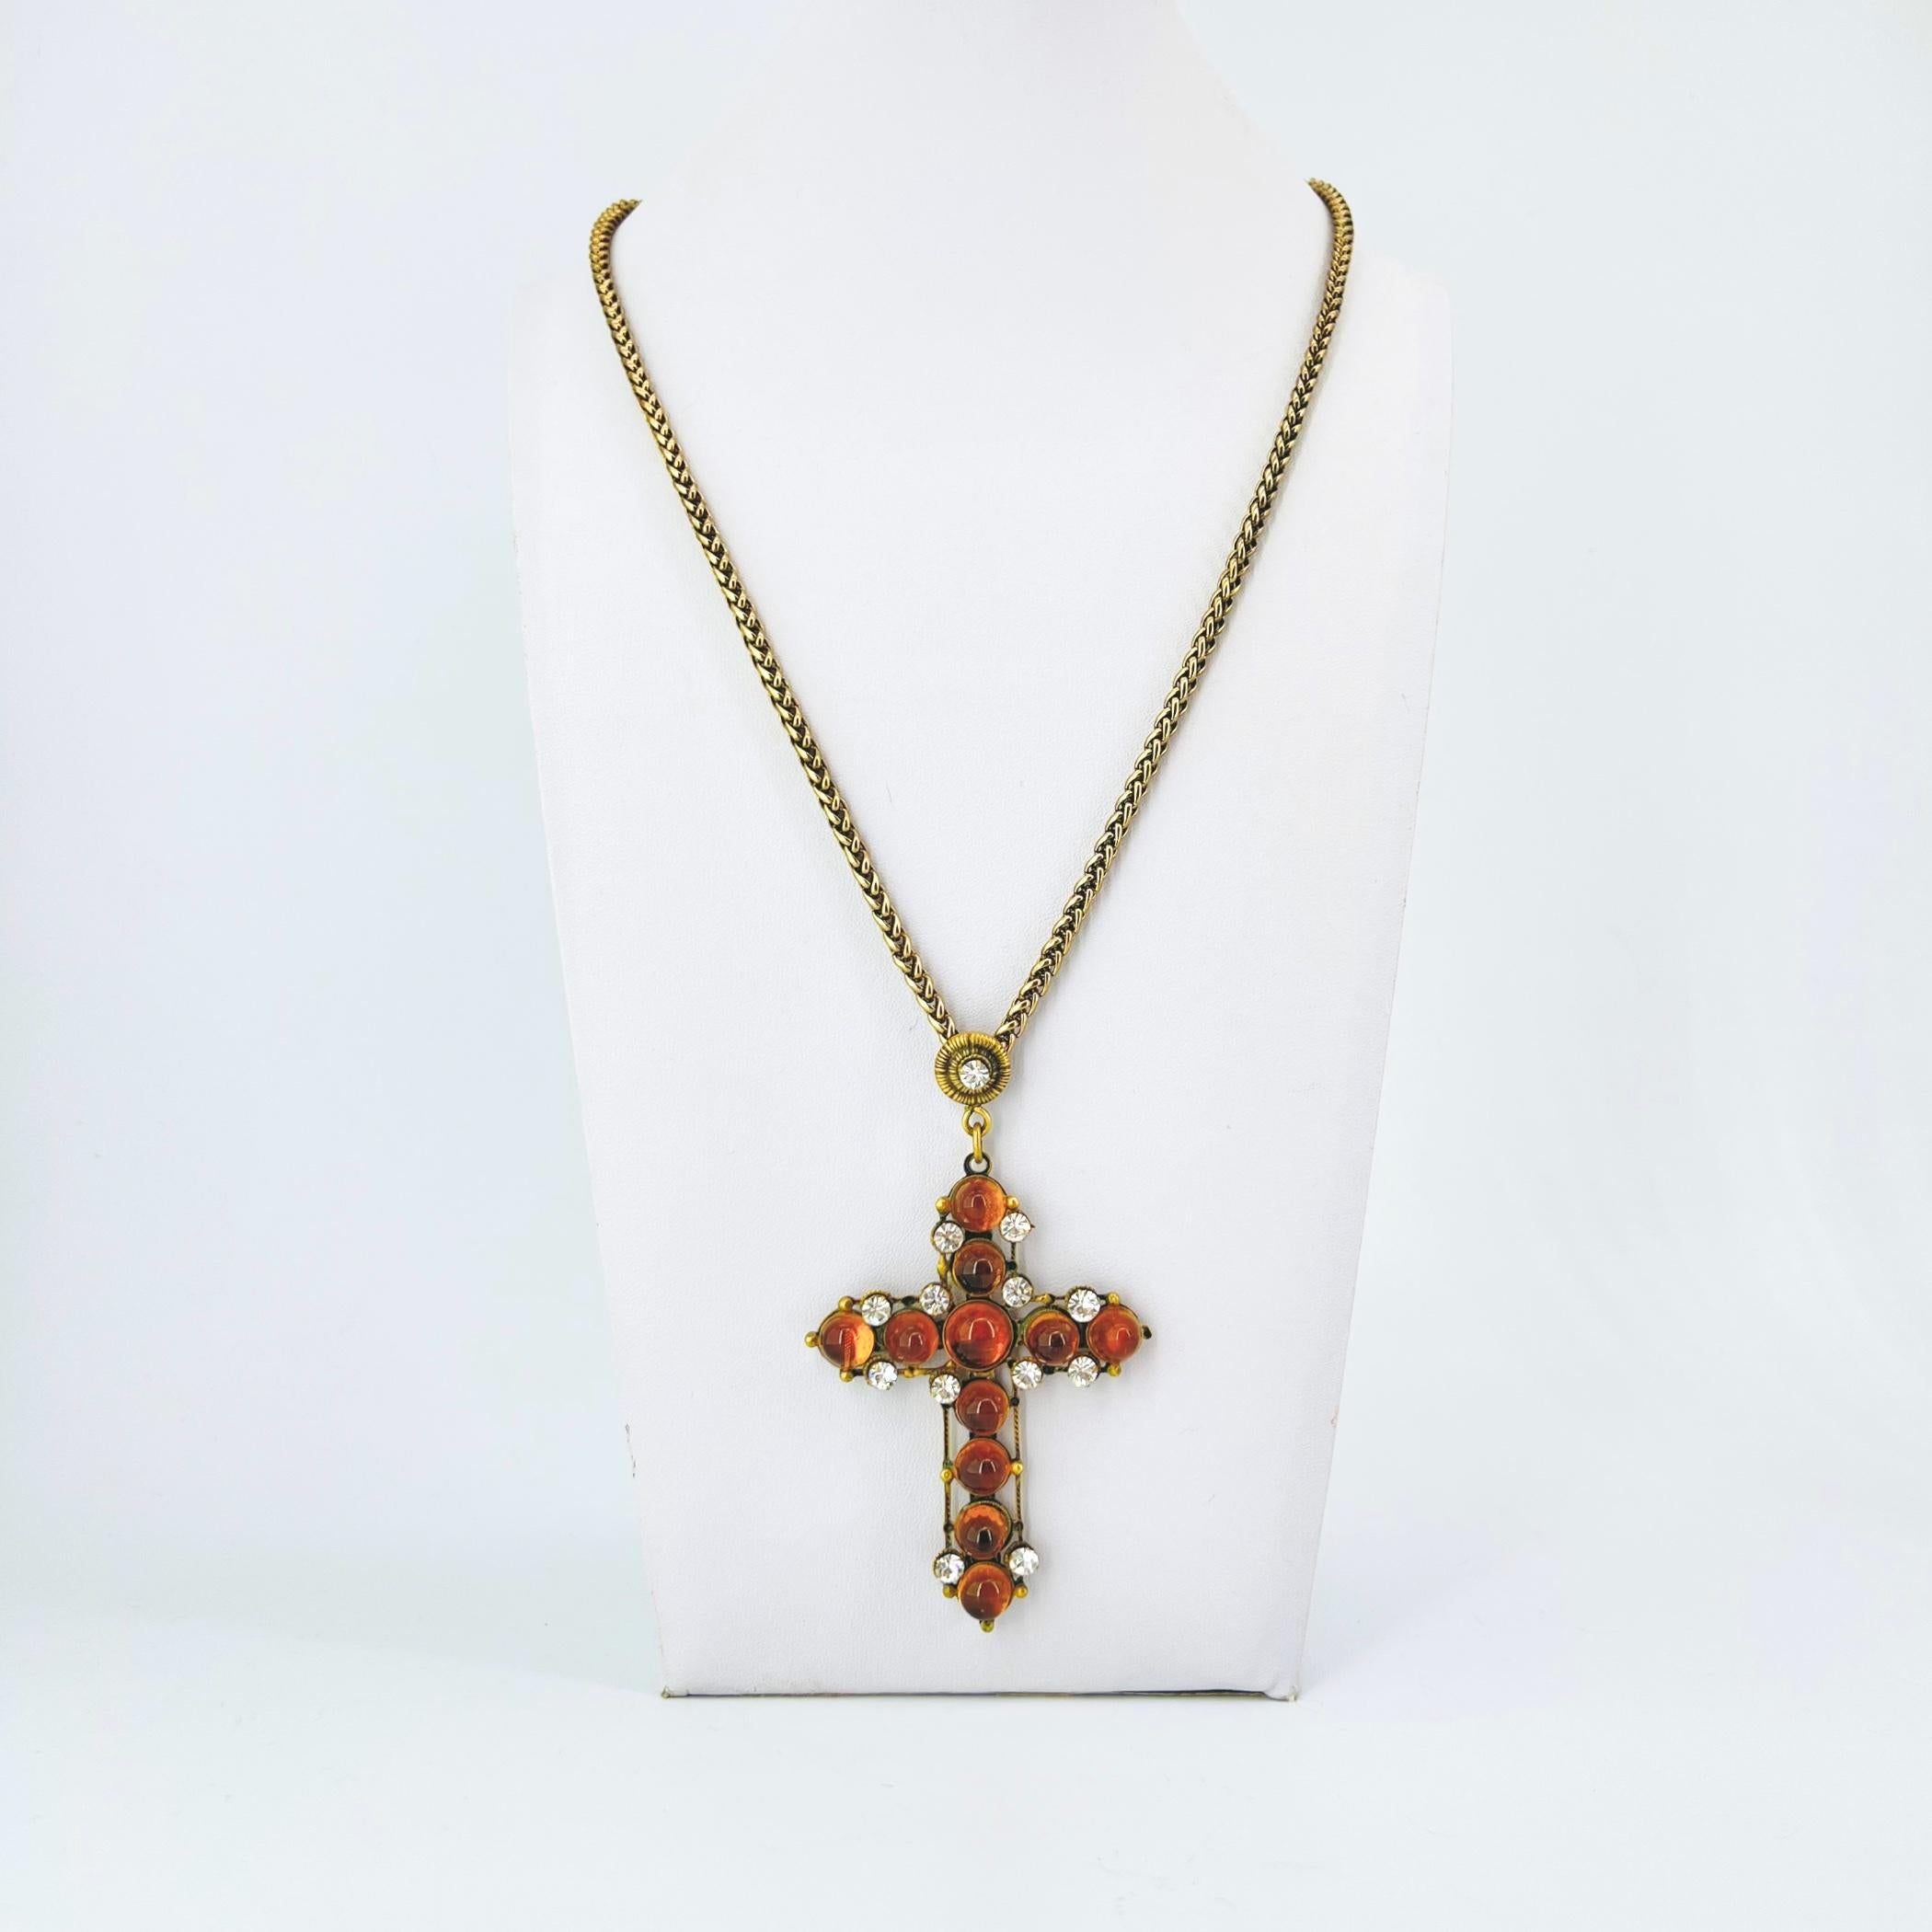 Classic & Brilliant Cross necklace with stacked Amber Cabochons and Vivid Clear Rhinestones with the Original Chain & Closure, all in Very Good Vintage Condition with some light patina to the metals.

Cross W 2 3/8 by H 3 3/16 in.
Chain L 25